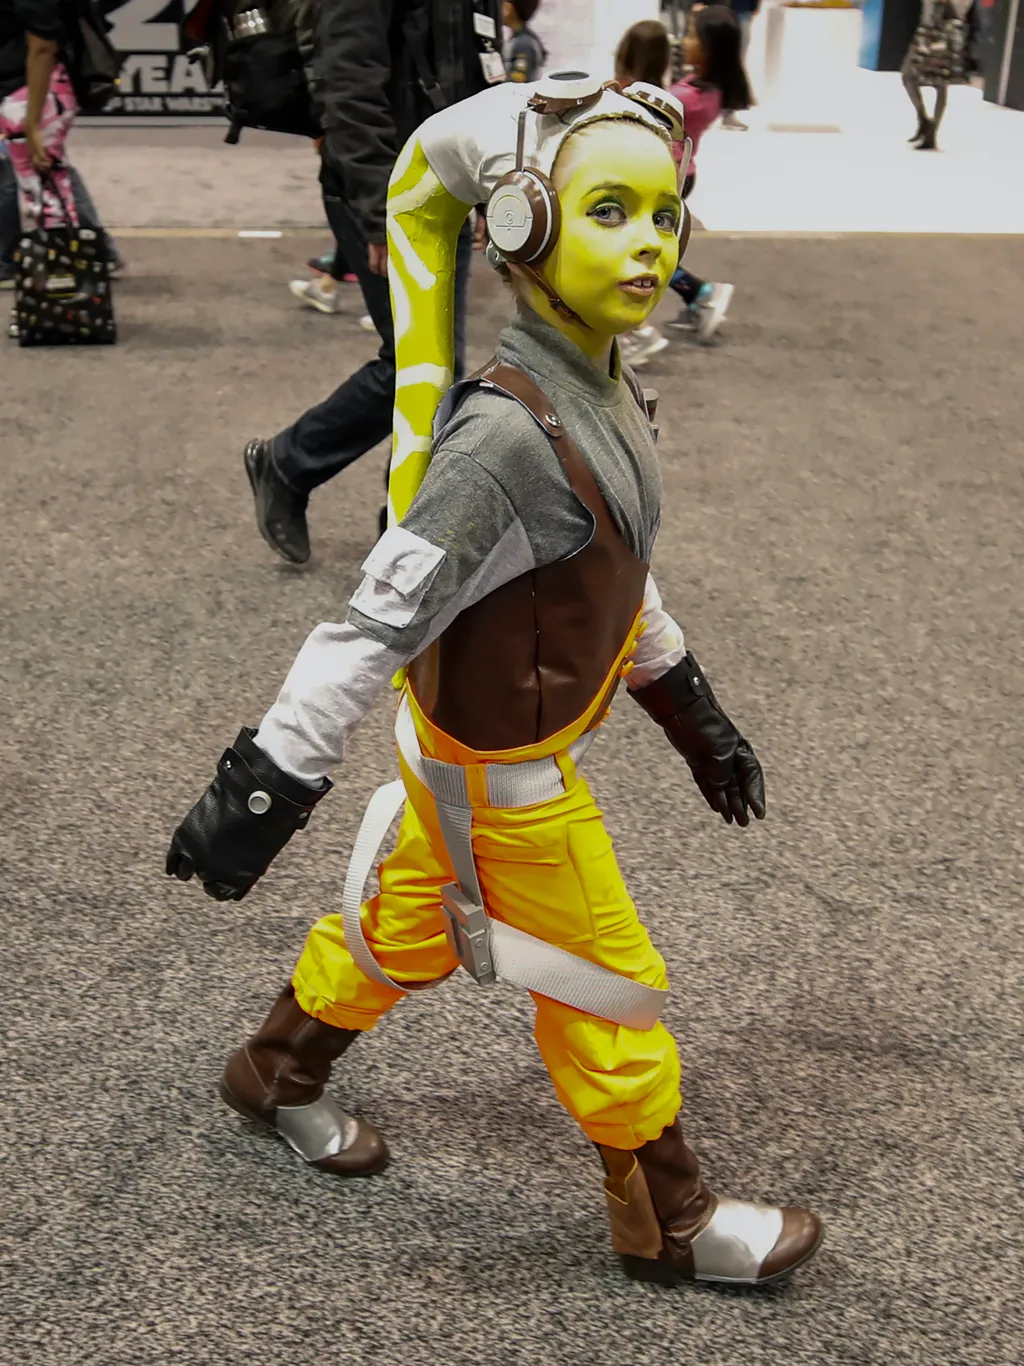 35.000 fans expected at Chicago Star Wars convention TOPSHOTS Vertical MOVIE COSTUME OFFBEAT 